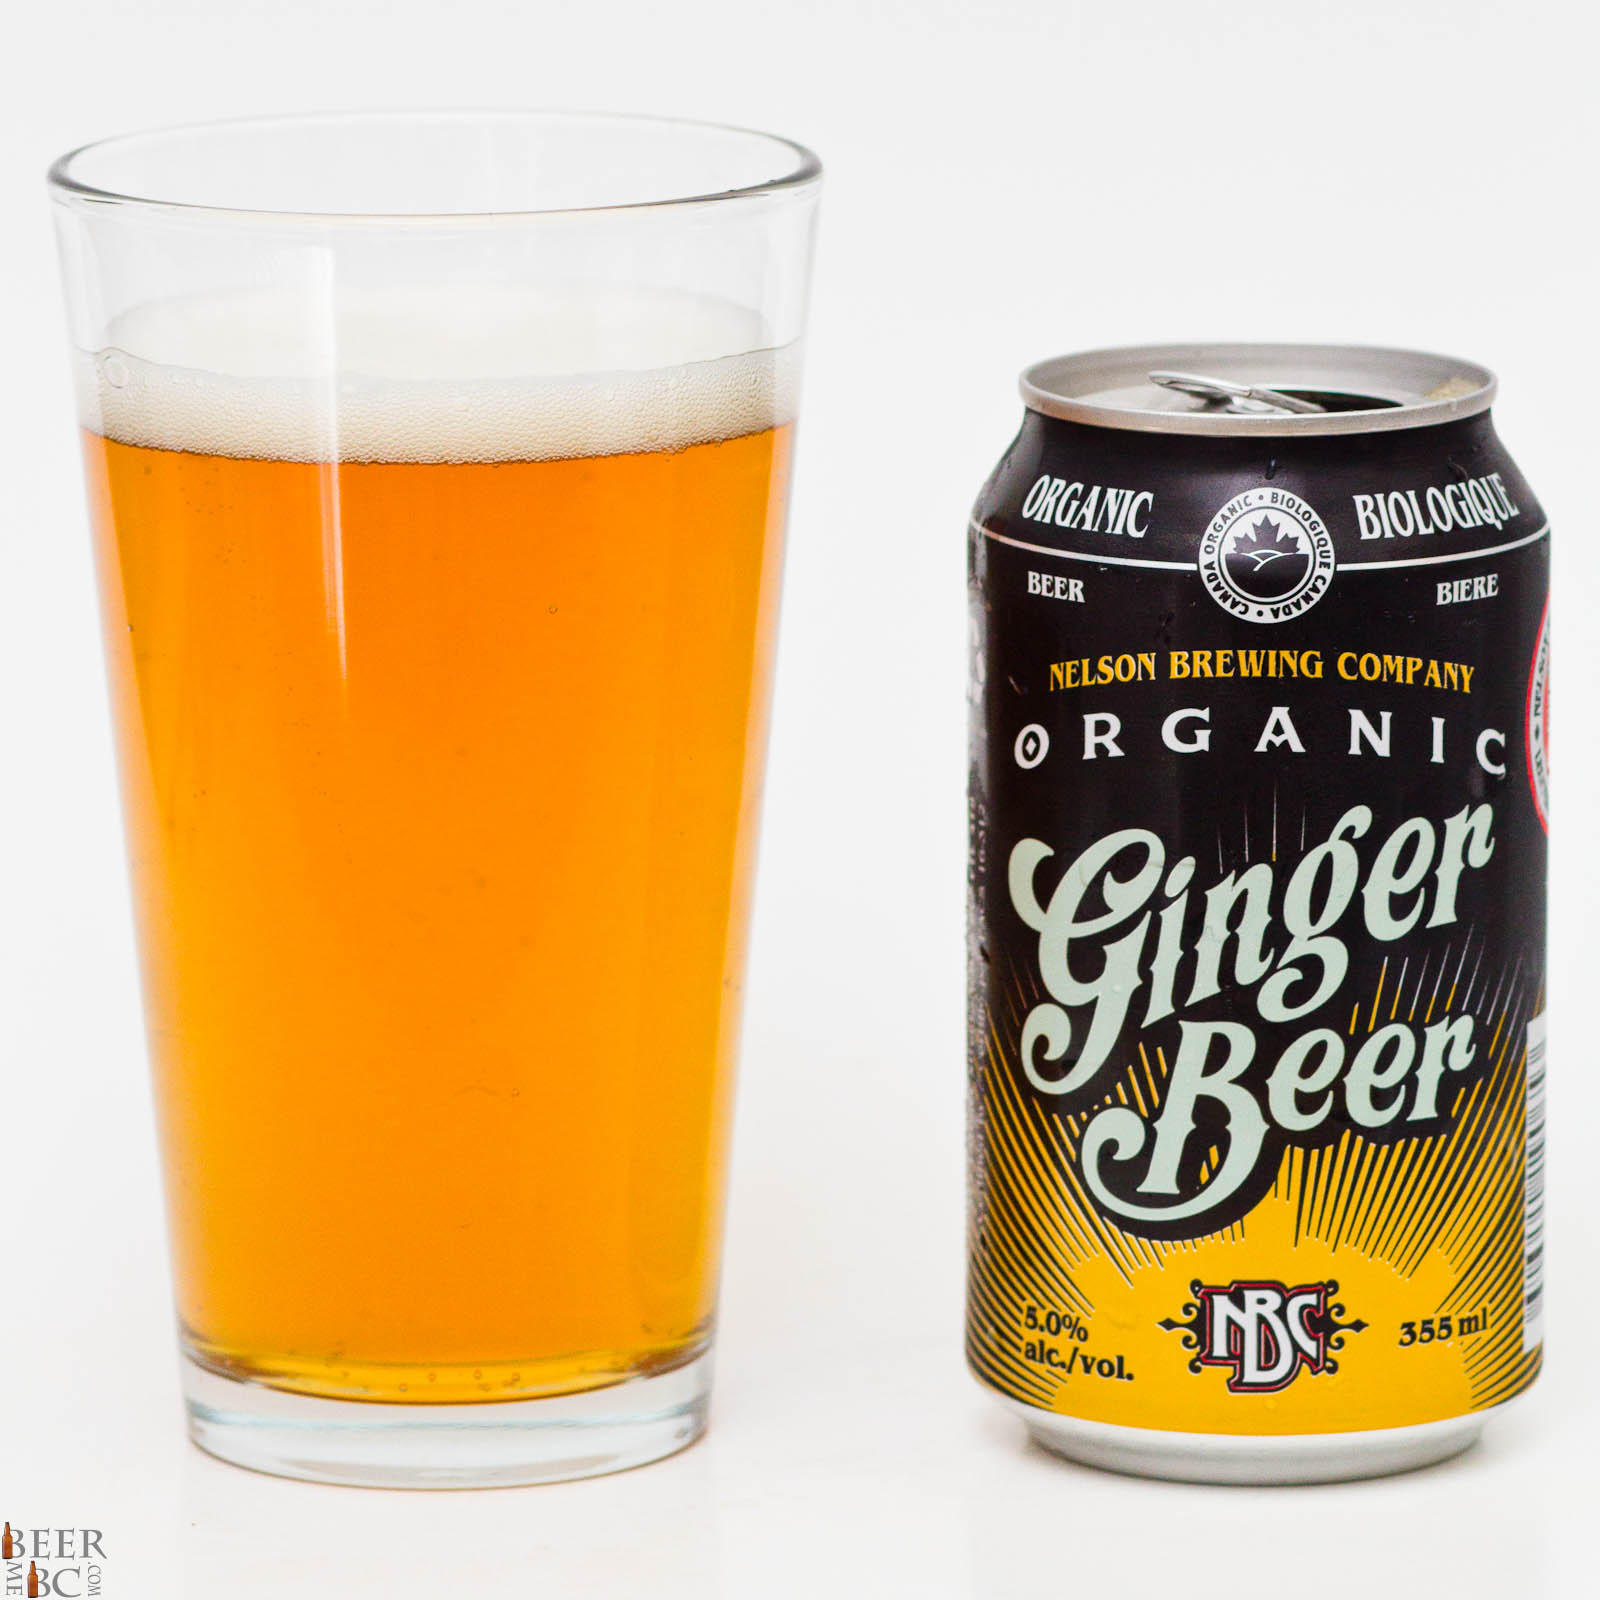 Nelson Brewing Co. – Organic Ginger Beer | Beer Me British Columbia